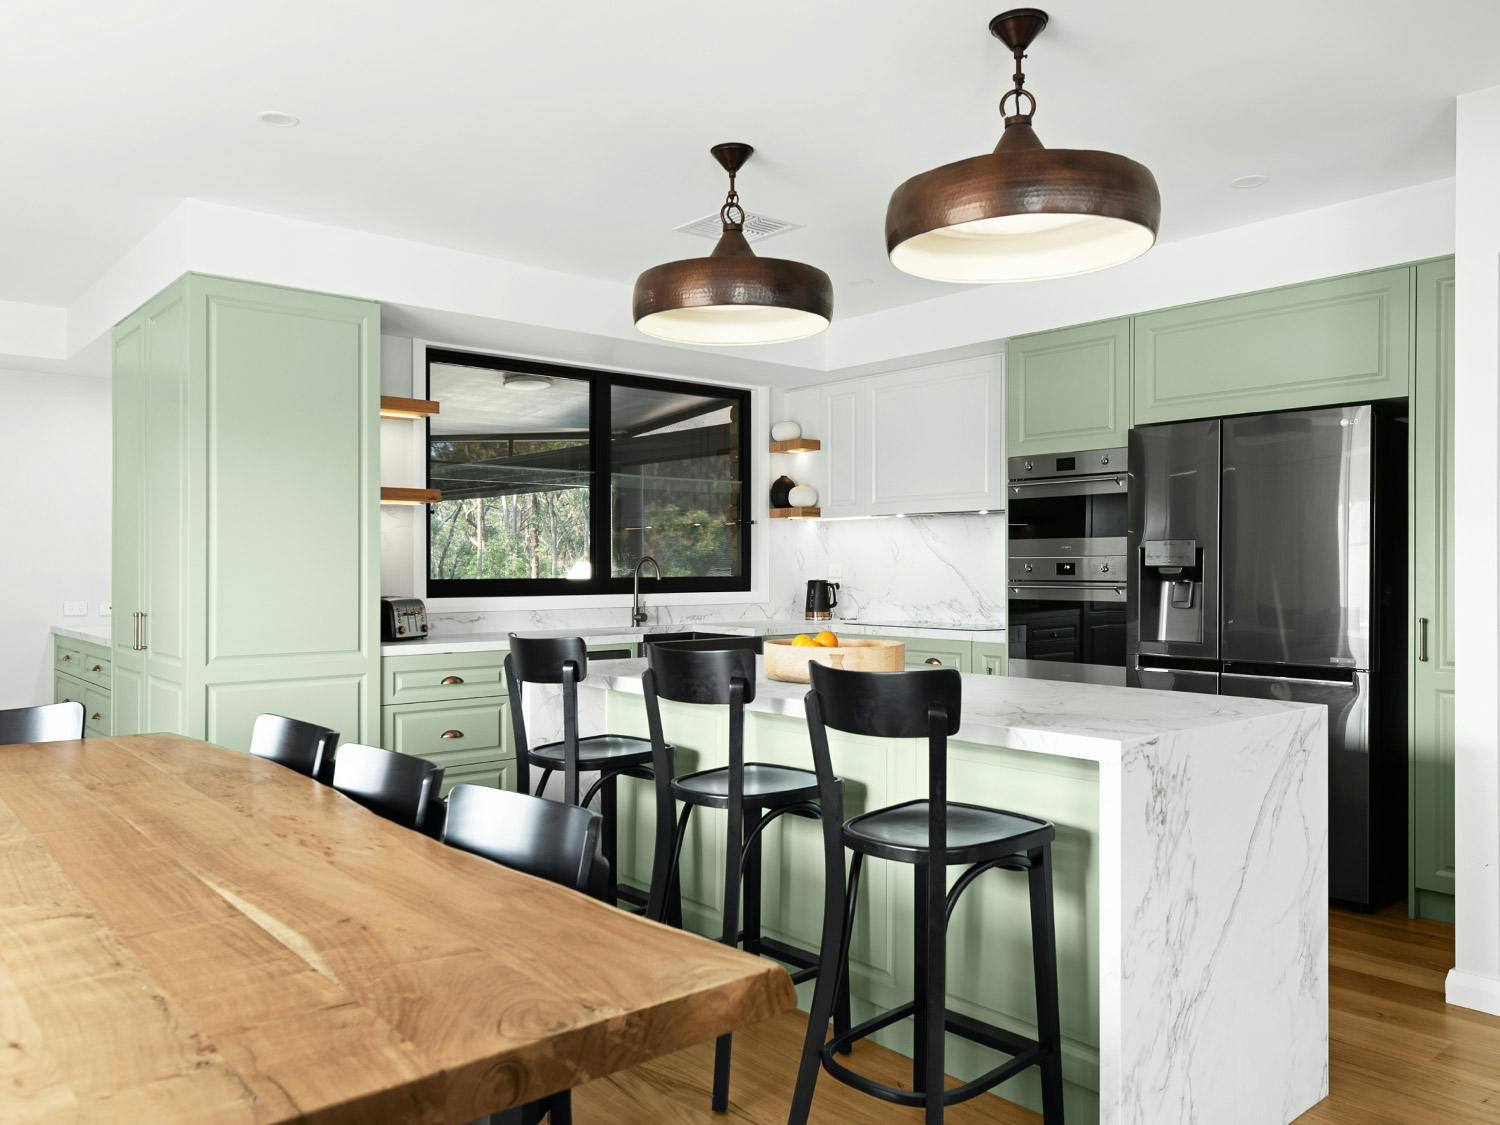 Nothing beats colour for adding personality and interest to a kitchen – two interior designers reveal how to get it right and the common mistakes to avoid